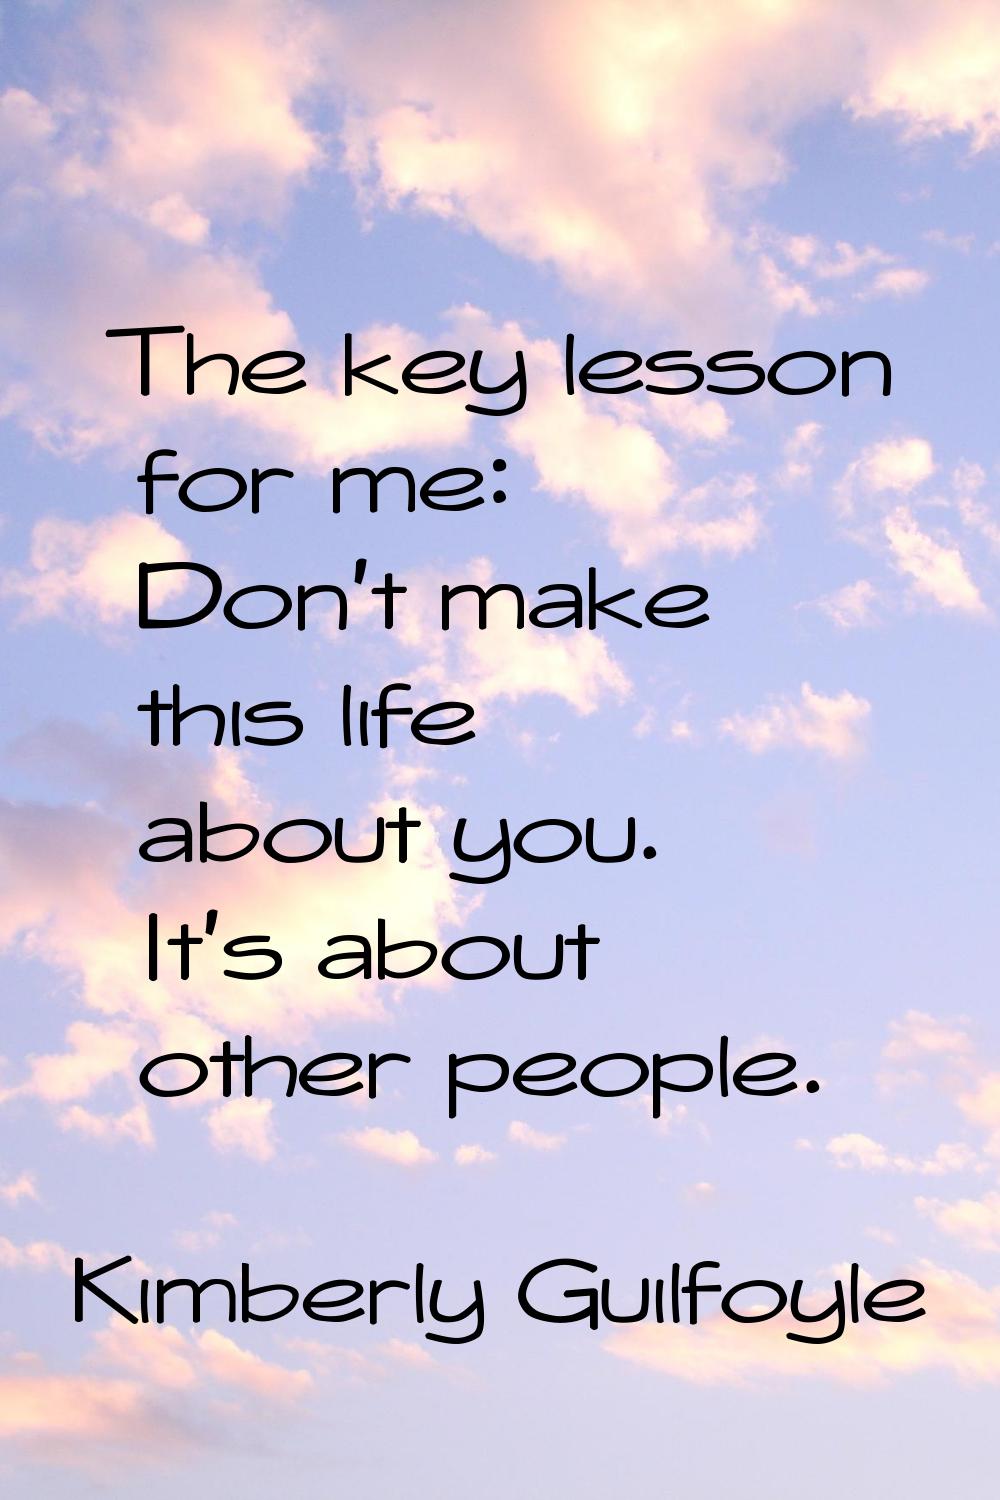 The key lesson for me: Don't make this life about you. It's about other people.